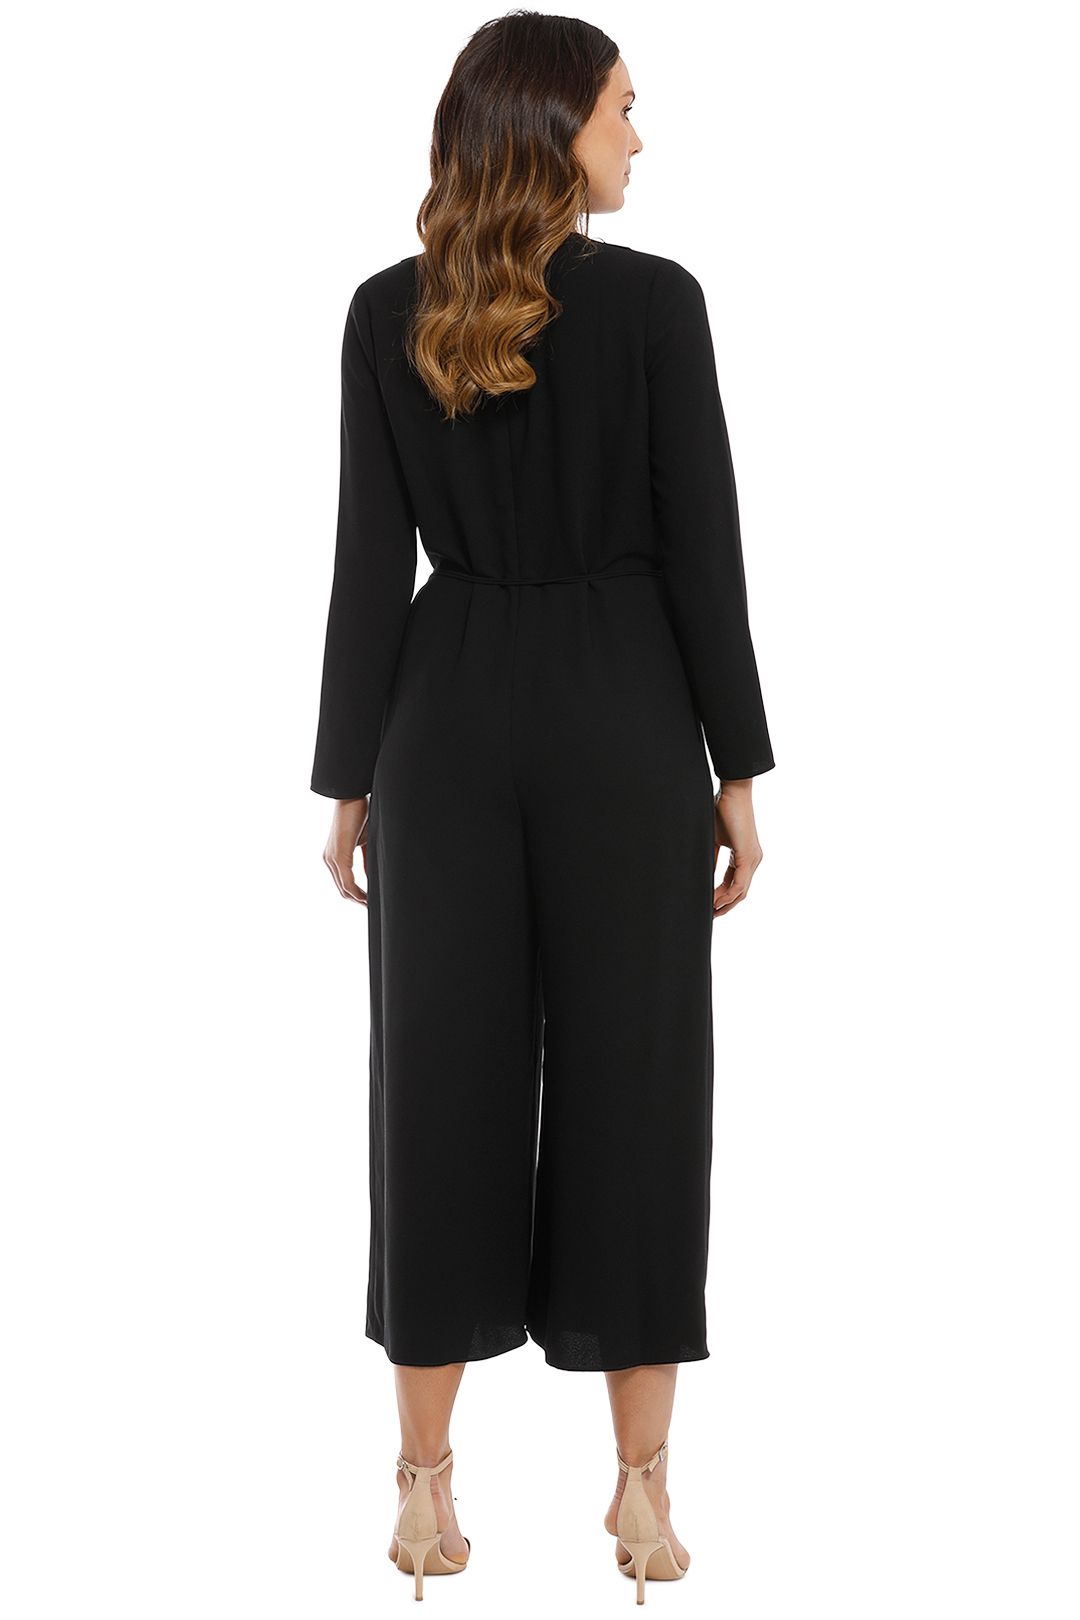 T By Alexander Wang - Cropped Jumpsuit - Black - Back